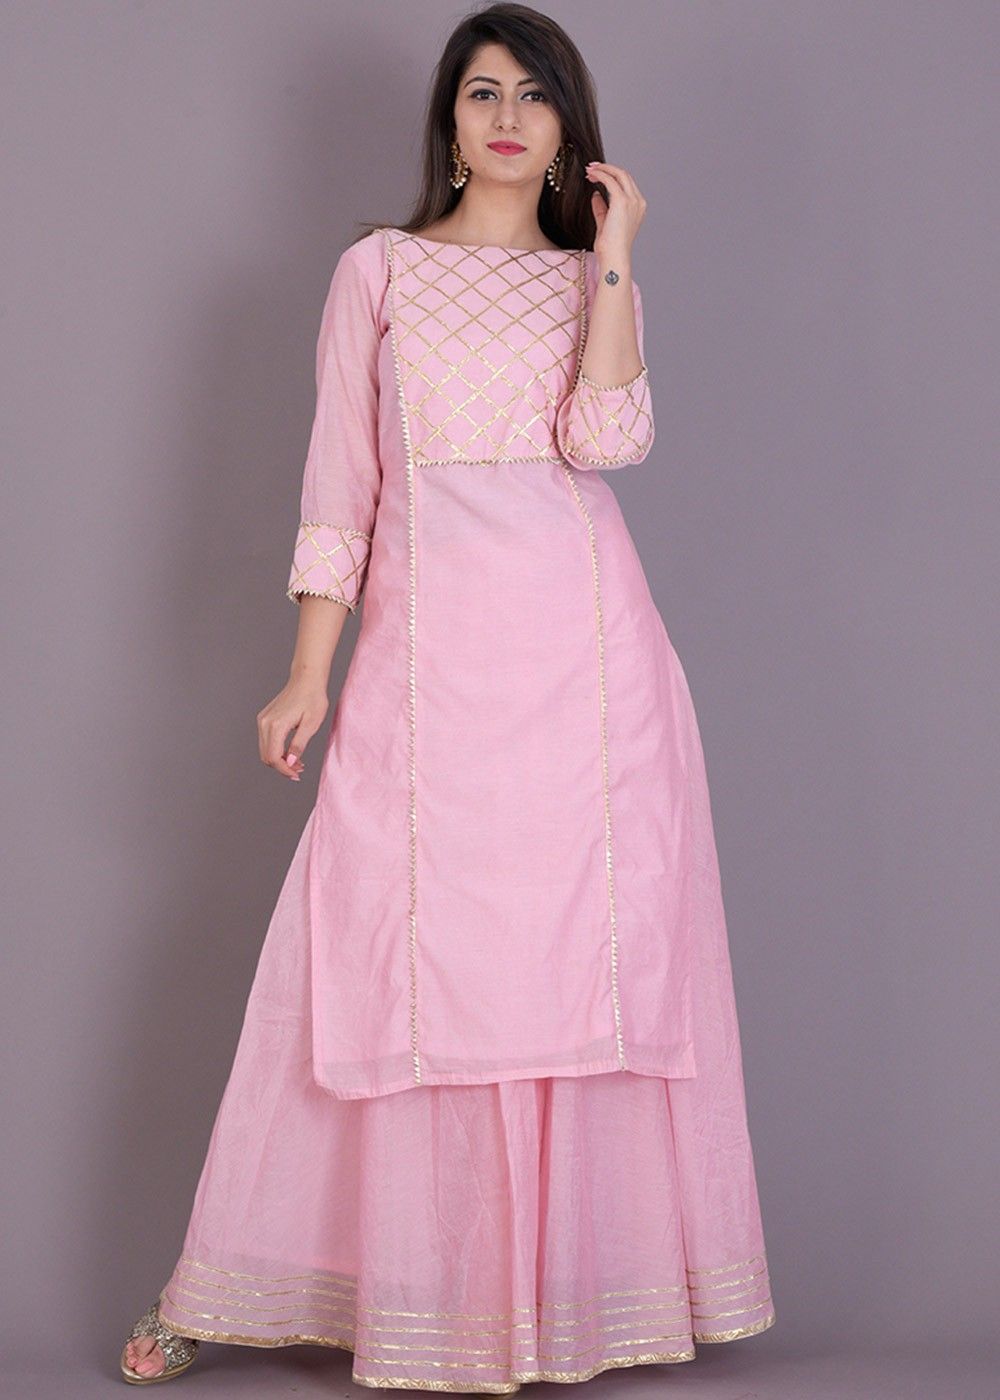 Details more than 82 pink kurti with skirt